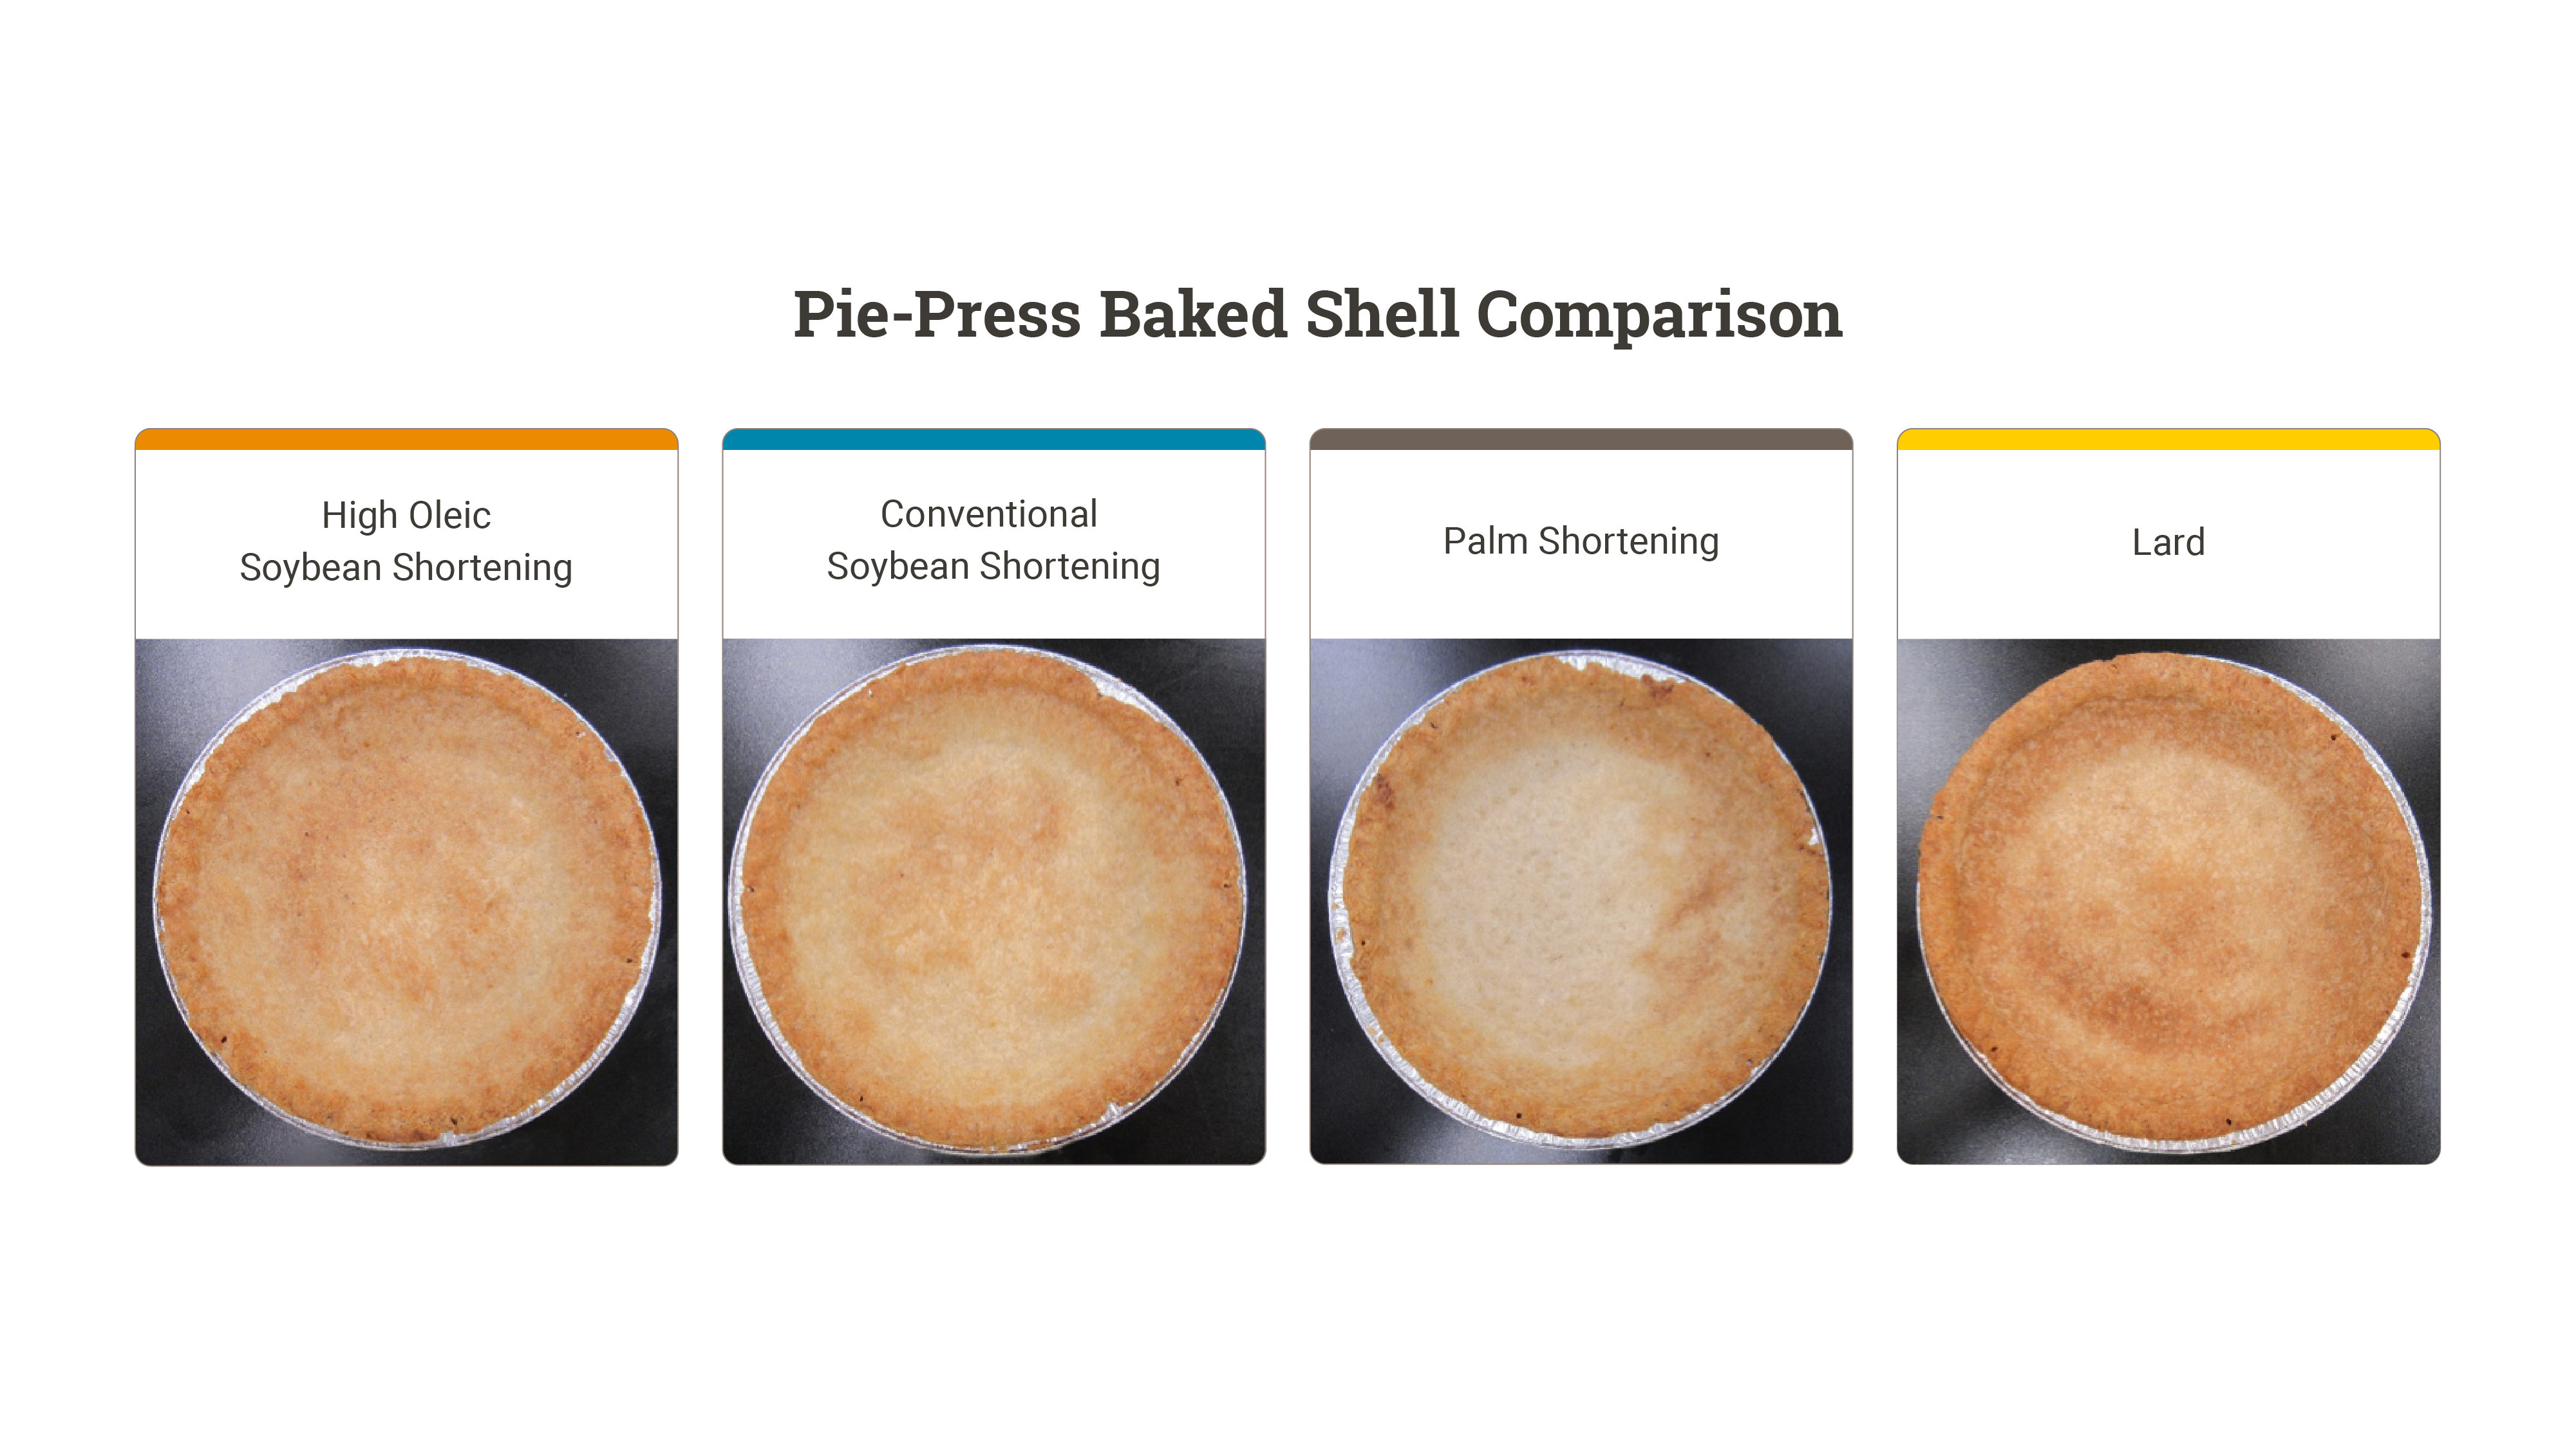 Pie-Press Baked Shell Comparison